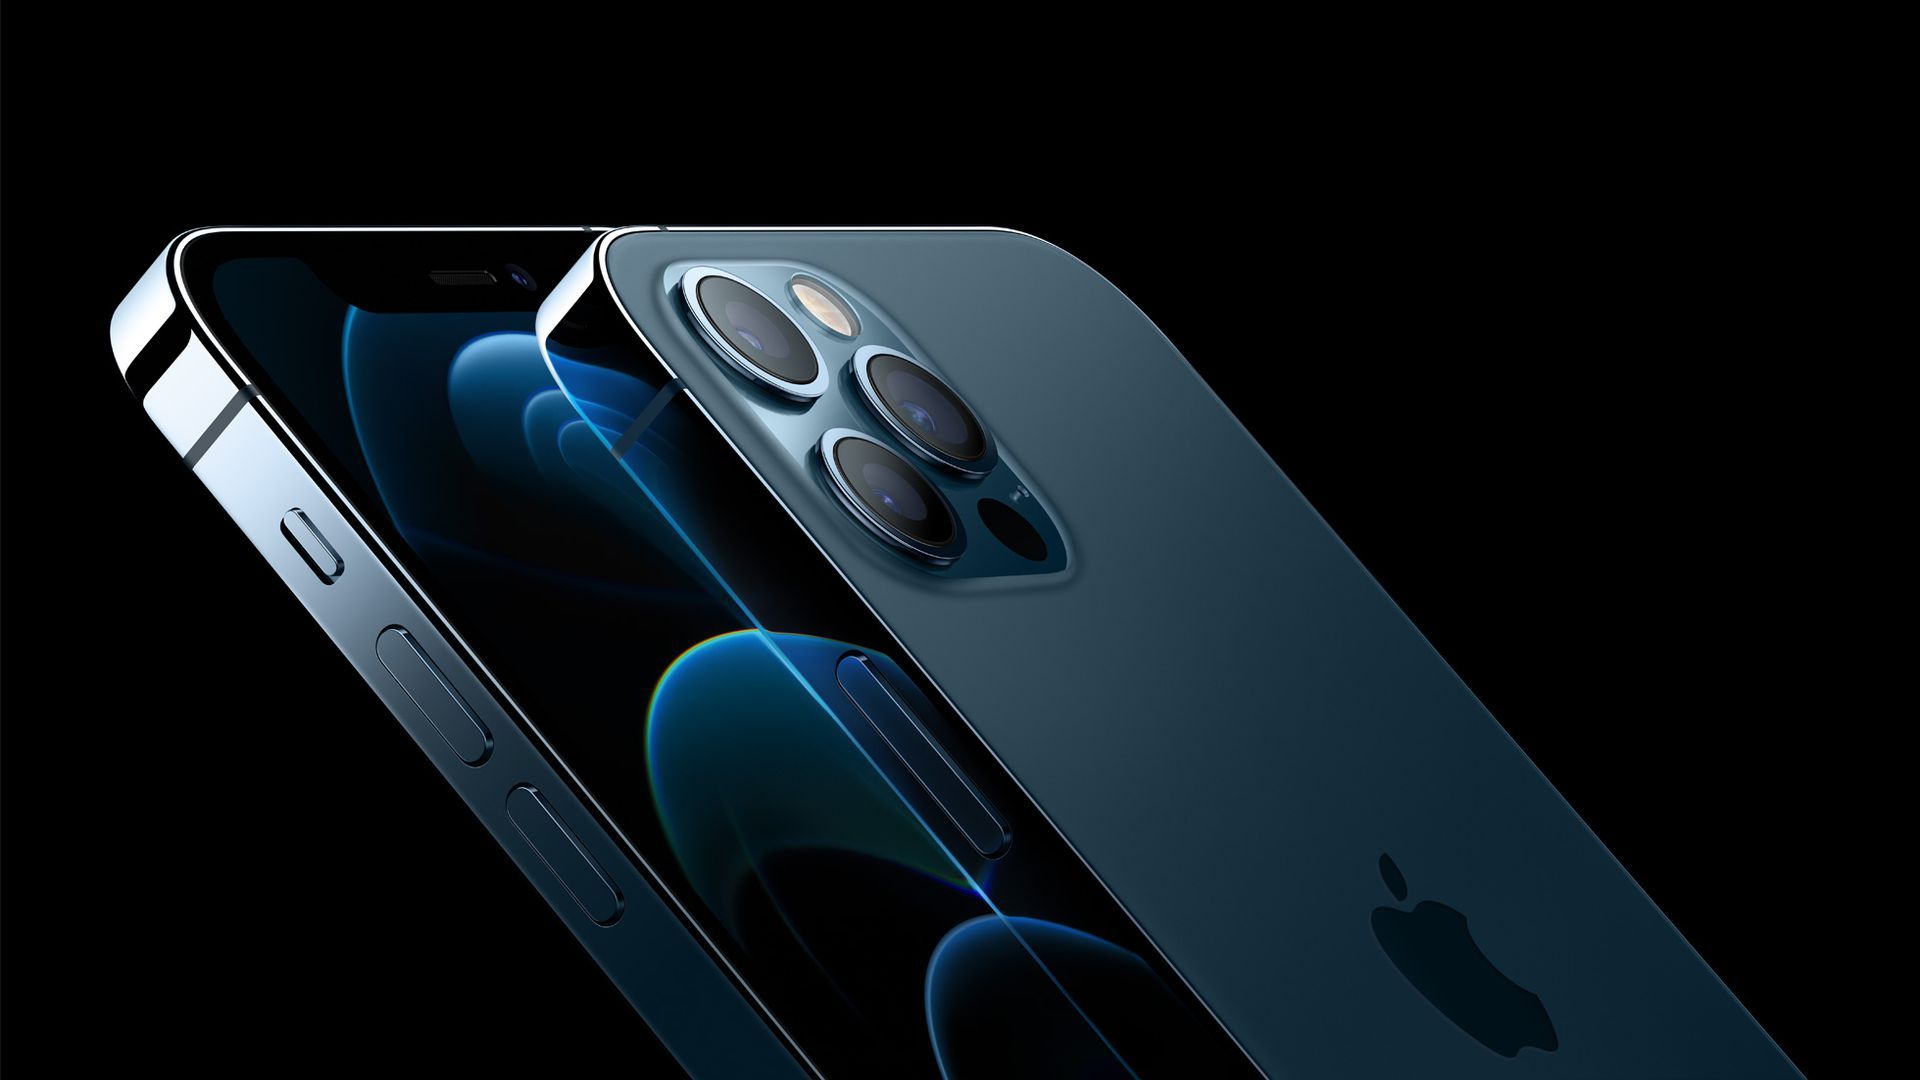 The iPhone 12 Pro features both 5G support as well as a lidar sensor. Photo: Apple